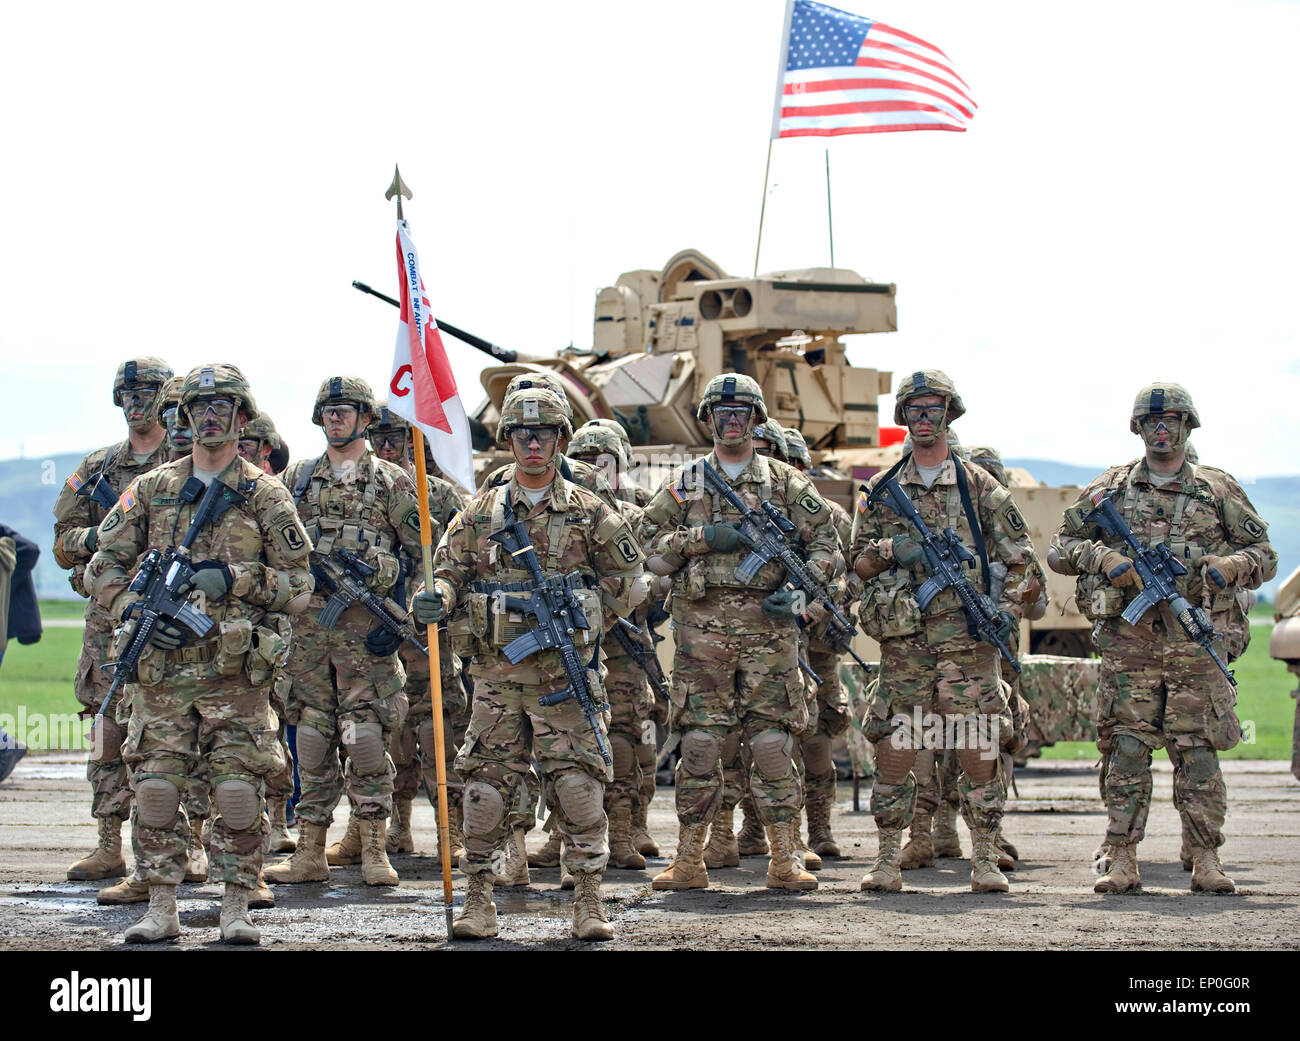 U.S. Army soldiers from the 91st Cavalry Regiment stand in formation during a ceremony kicking off exercise Noble Partner May 11, 2015 in Vaziani, Georgia. Noble Partner is a field training and live-fire exercise between the U.S. Army and the Georgian military. Stock Photo